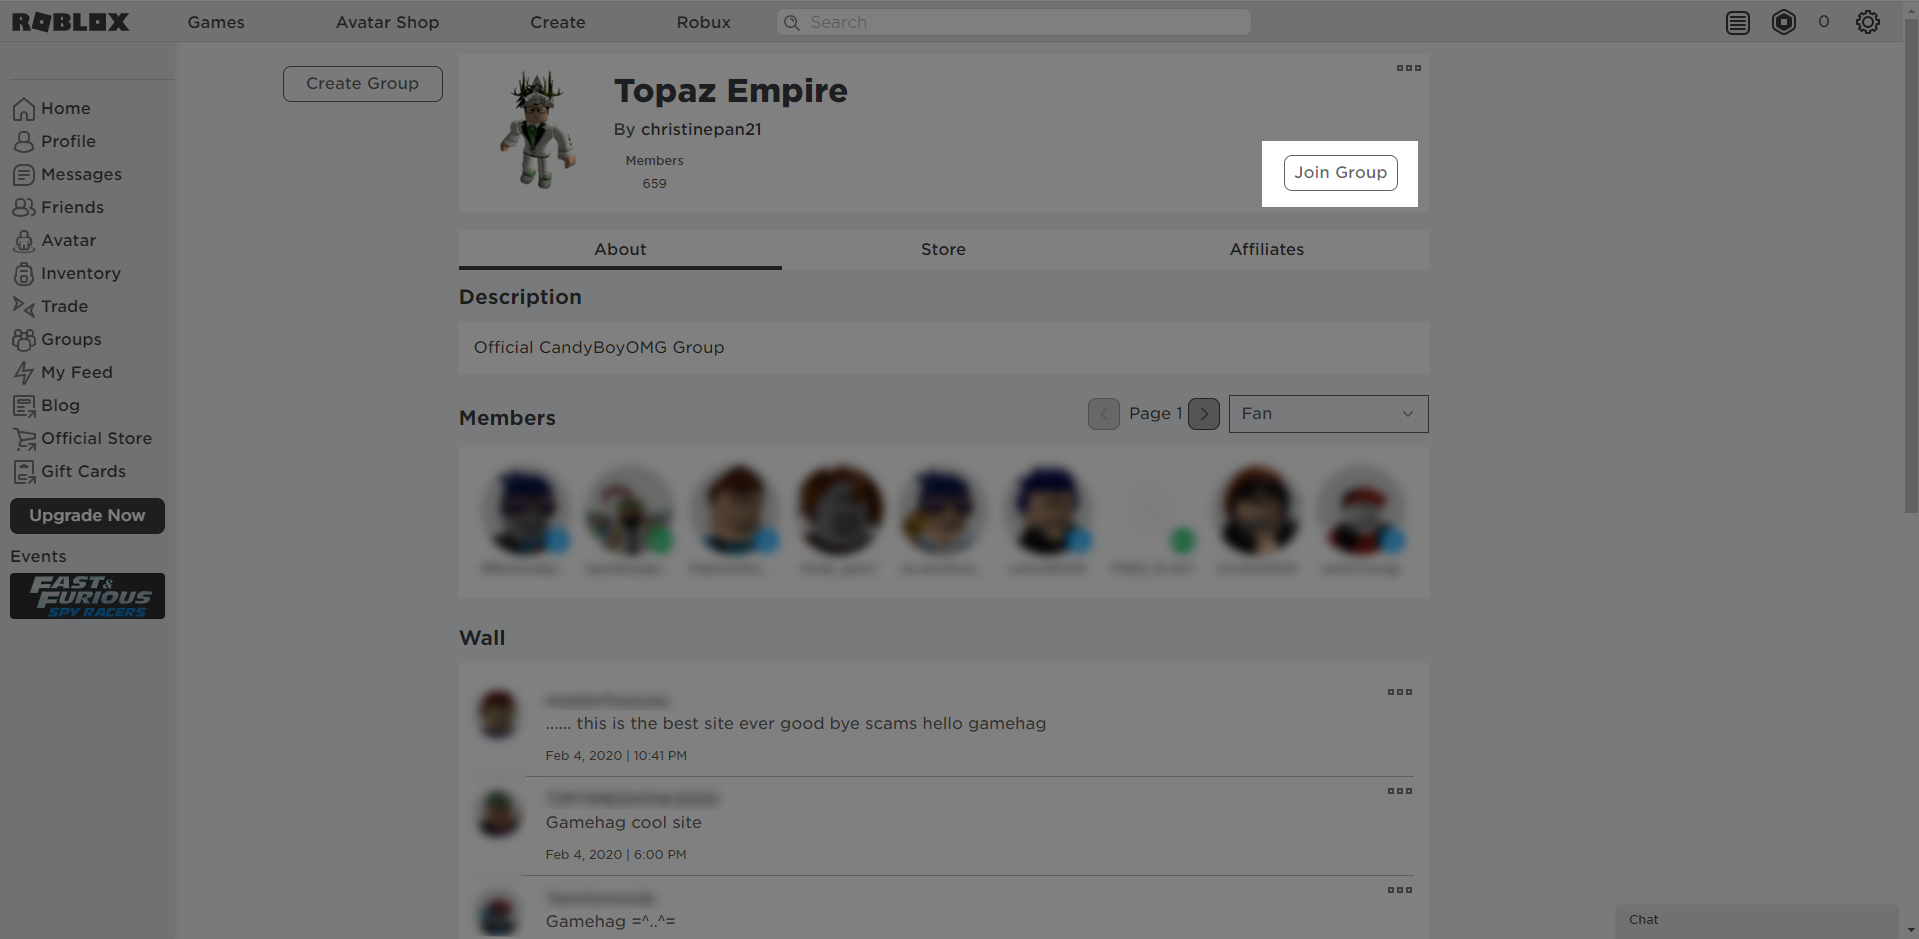 Groups To Join In Roblox To Get Robux